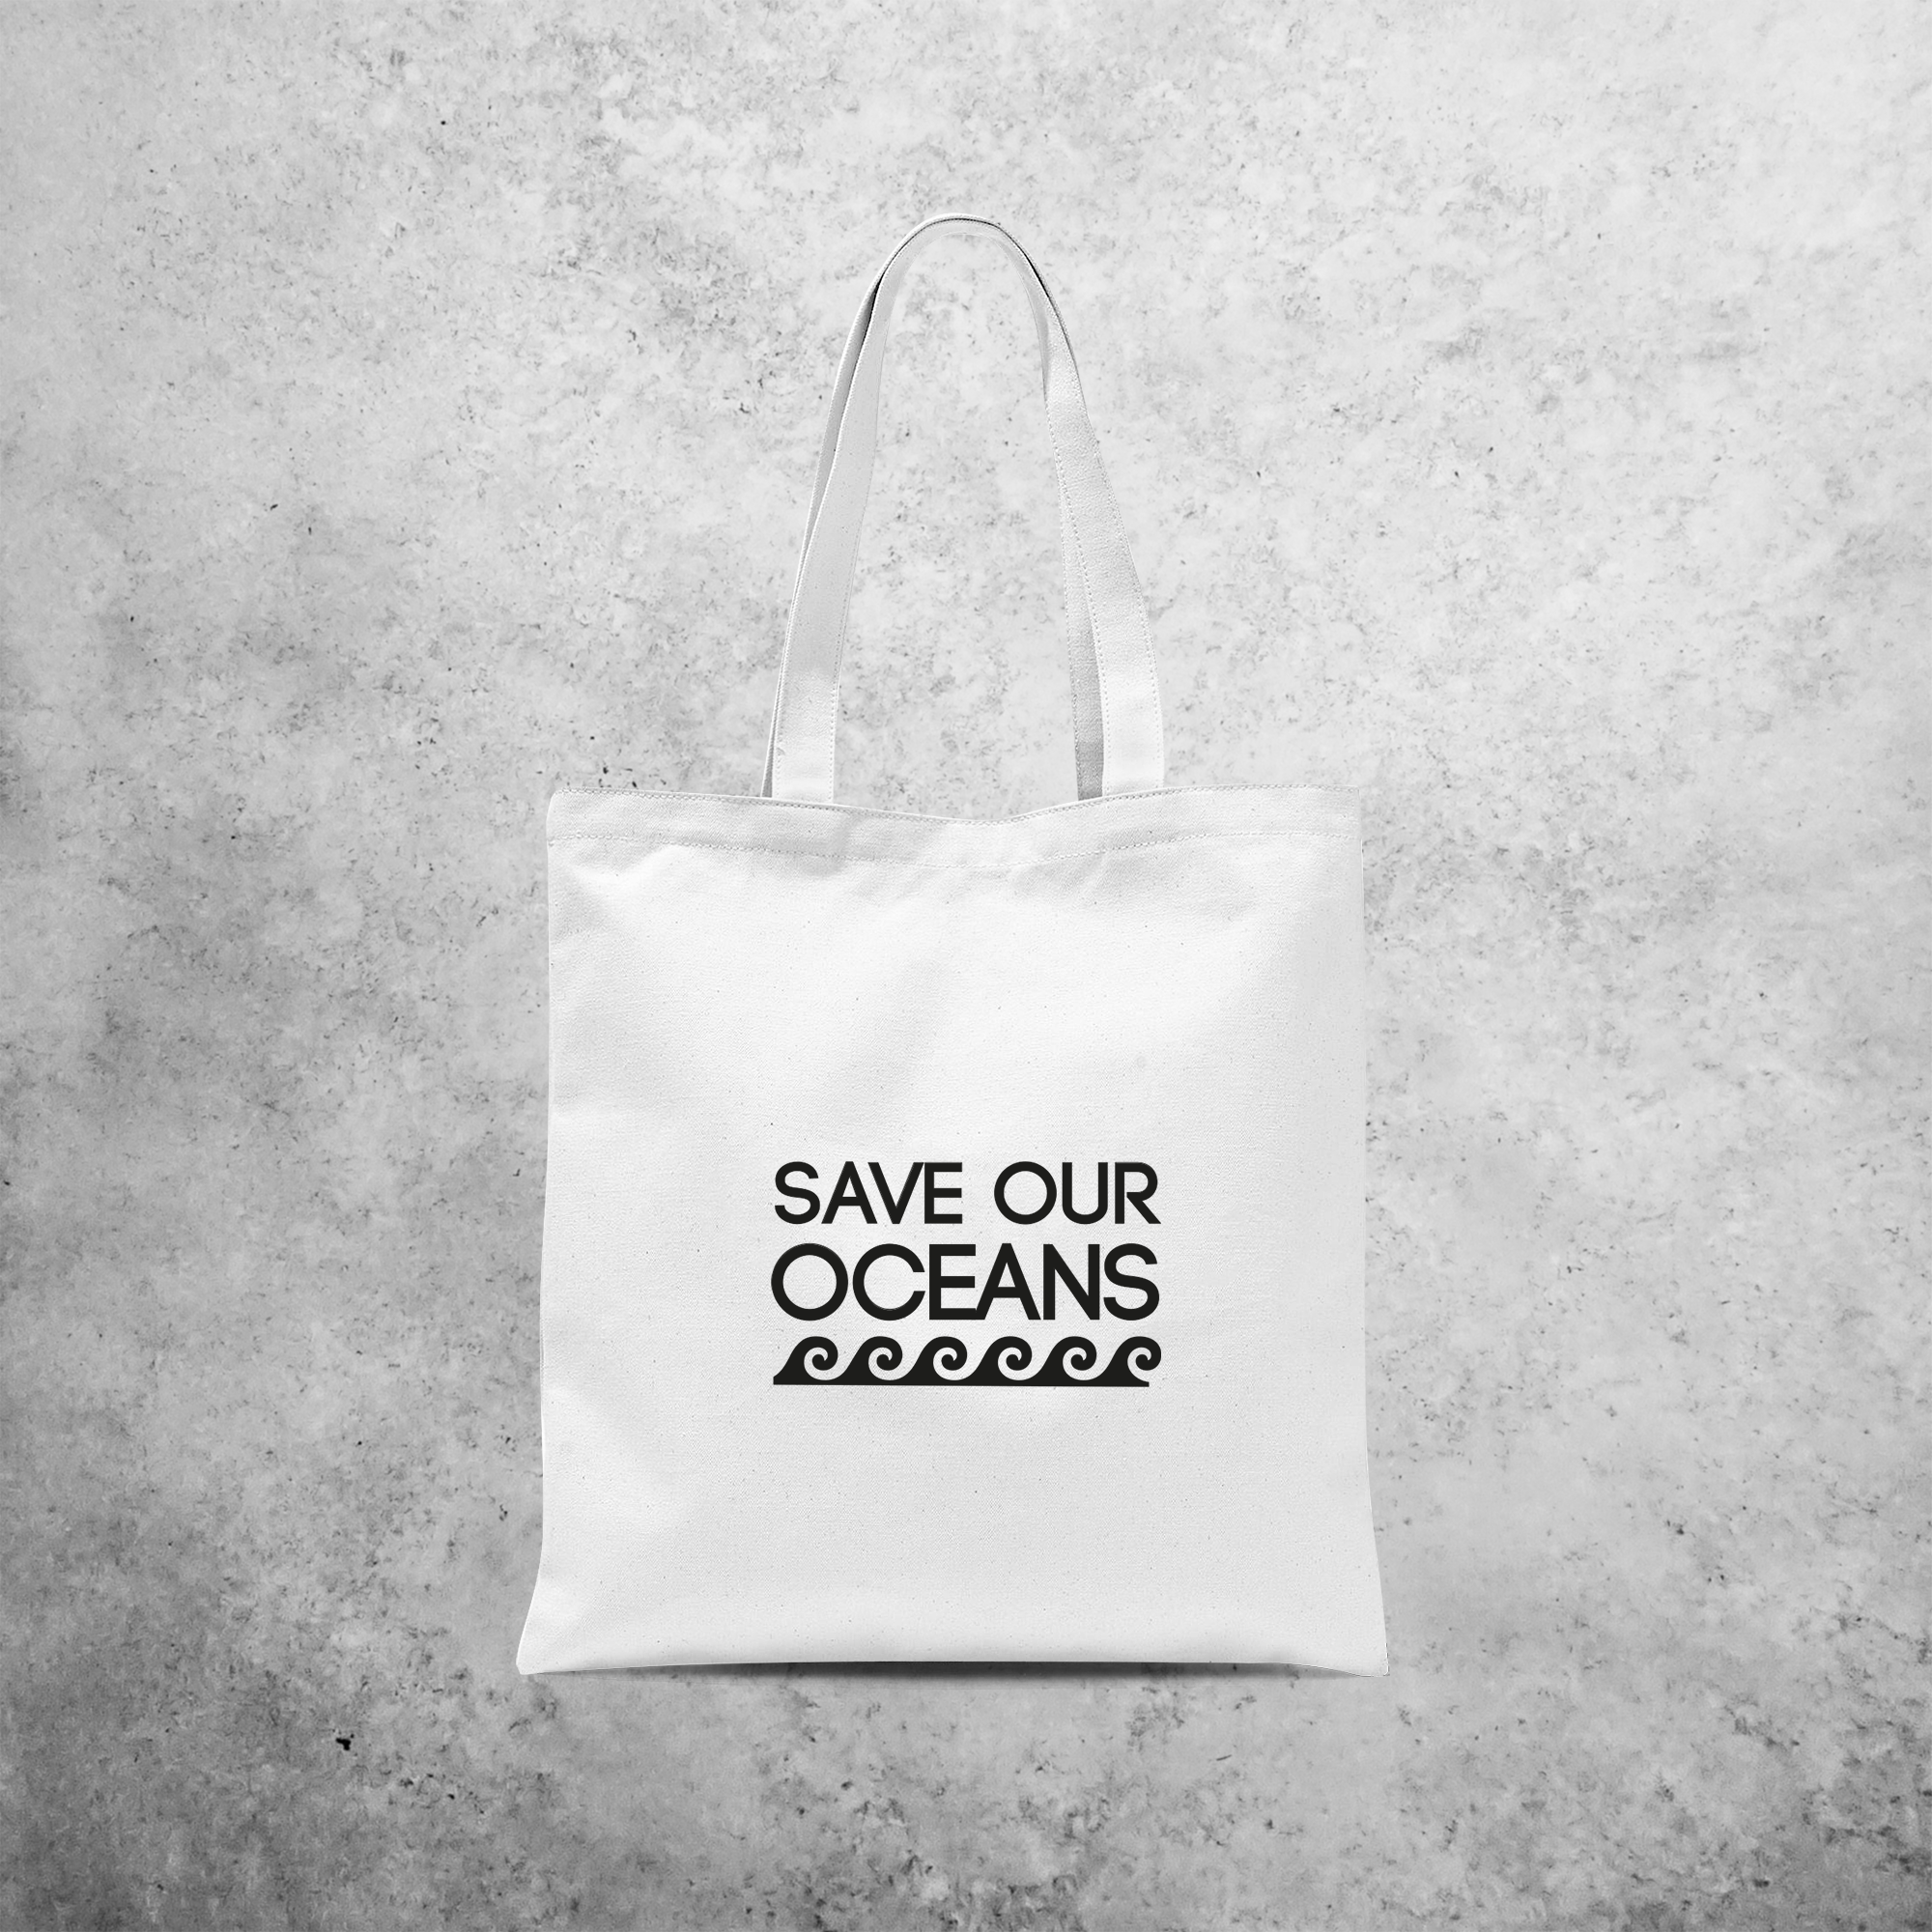 'Save our oceans' tote bag